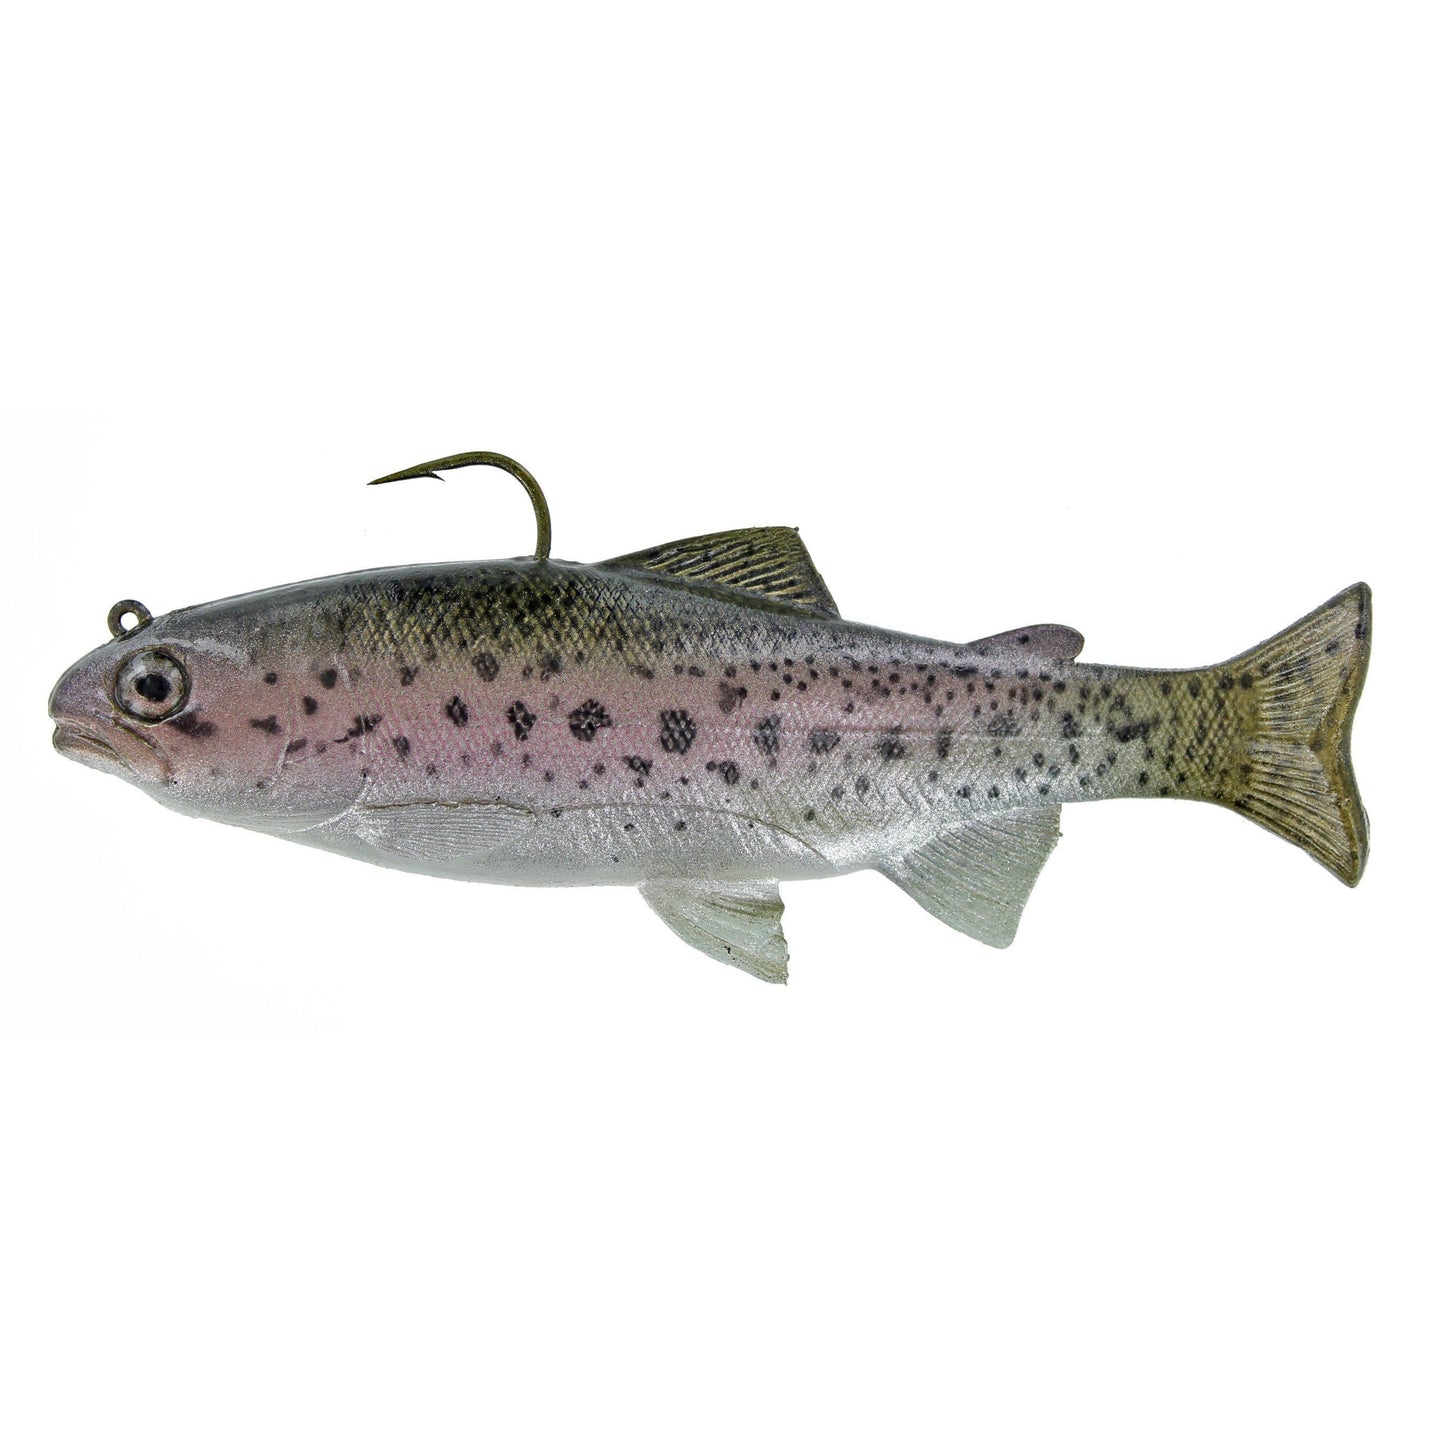 Appalachian Baits restock in Chilhowie at Scotty's. #appalachianbaits  #Baits #troutbaits #fishingbait #trout #troutfishing, By Appalachian Baits